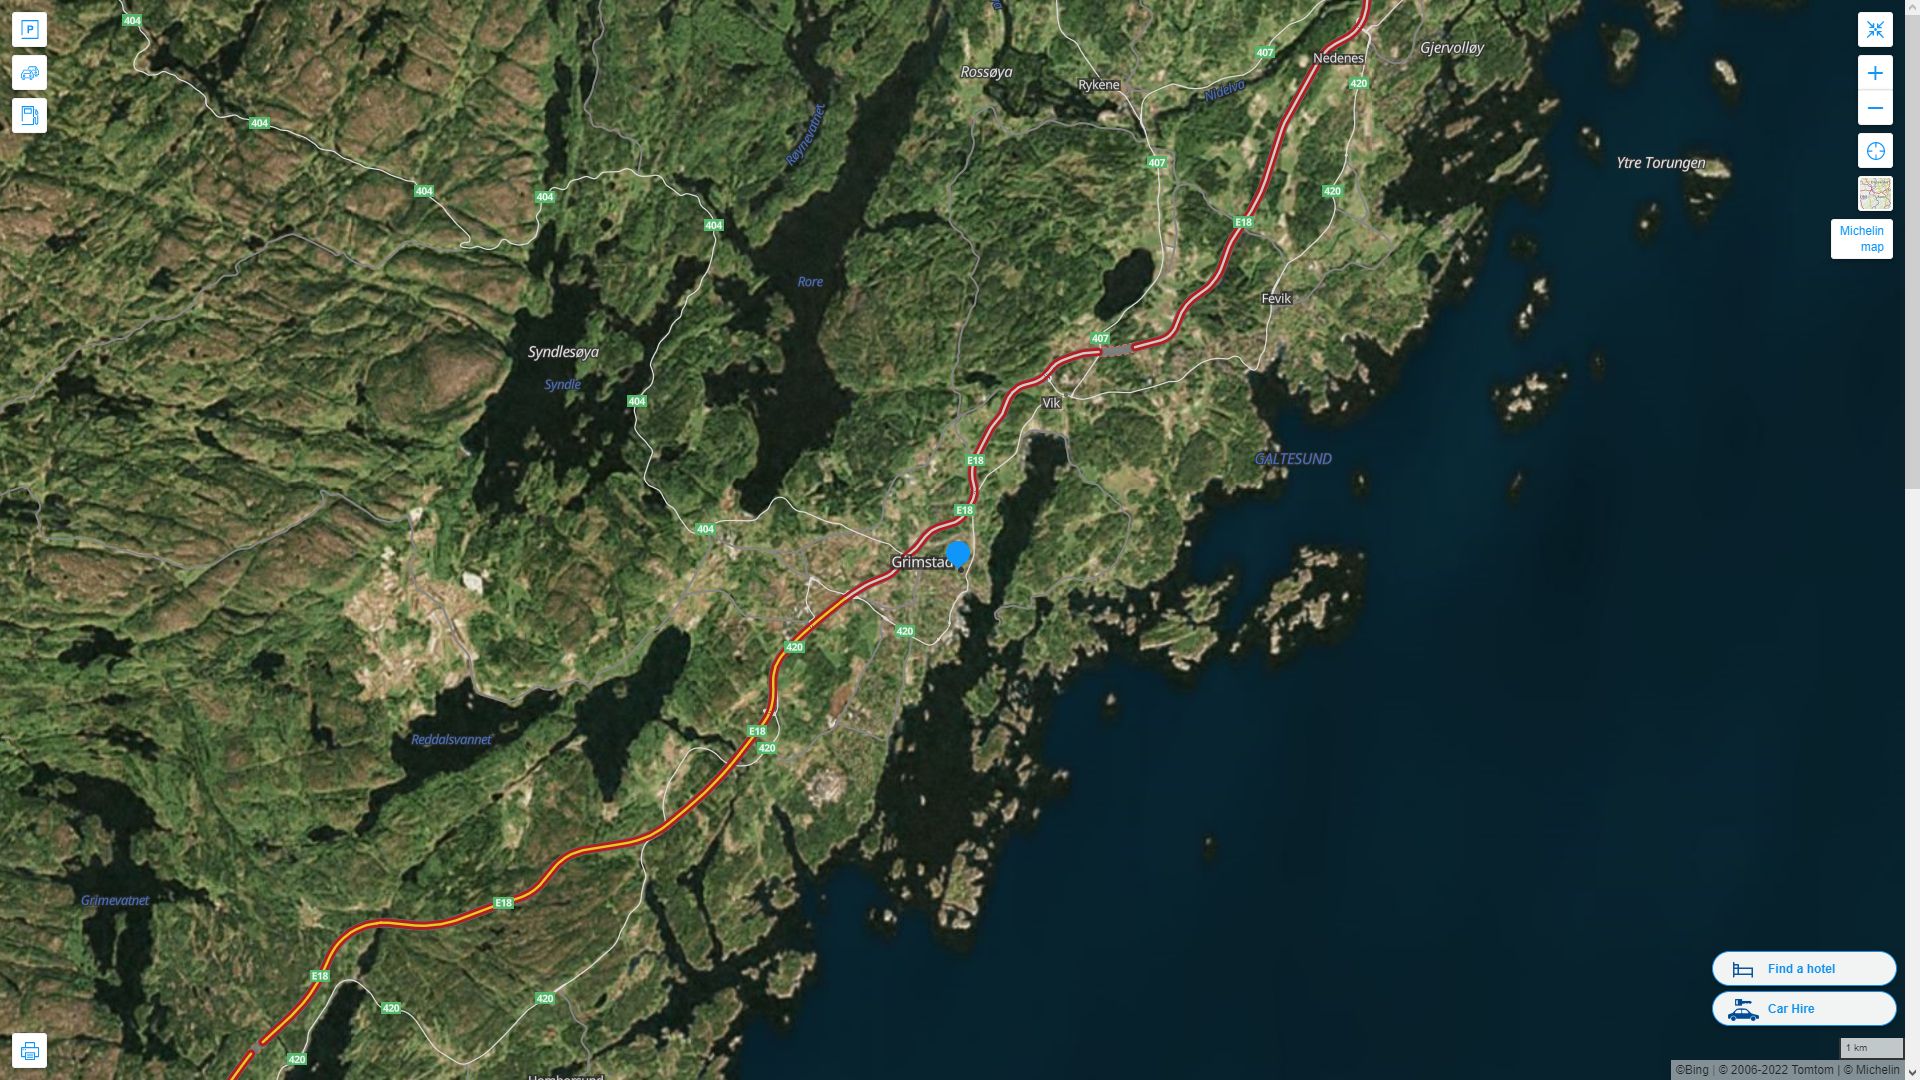 Grimstad Highway and Road Map with Satellite View